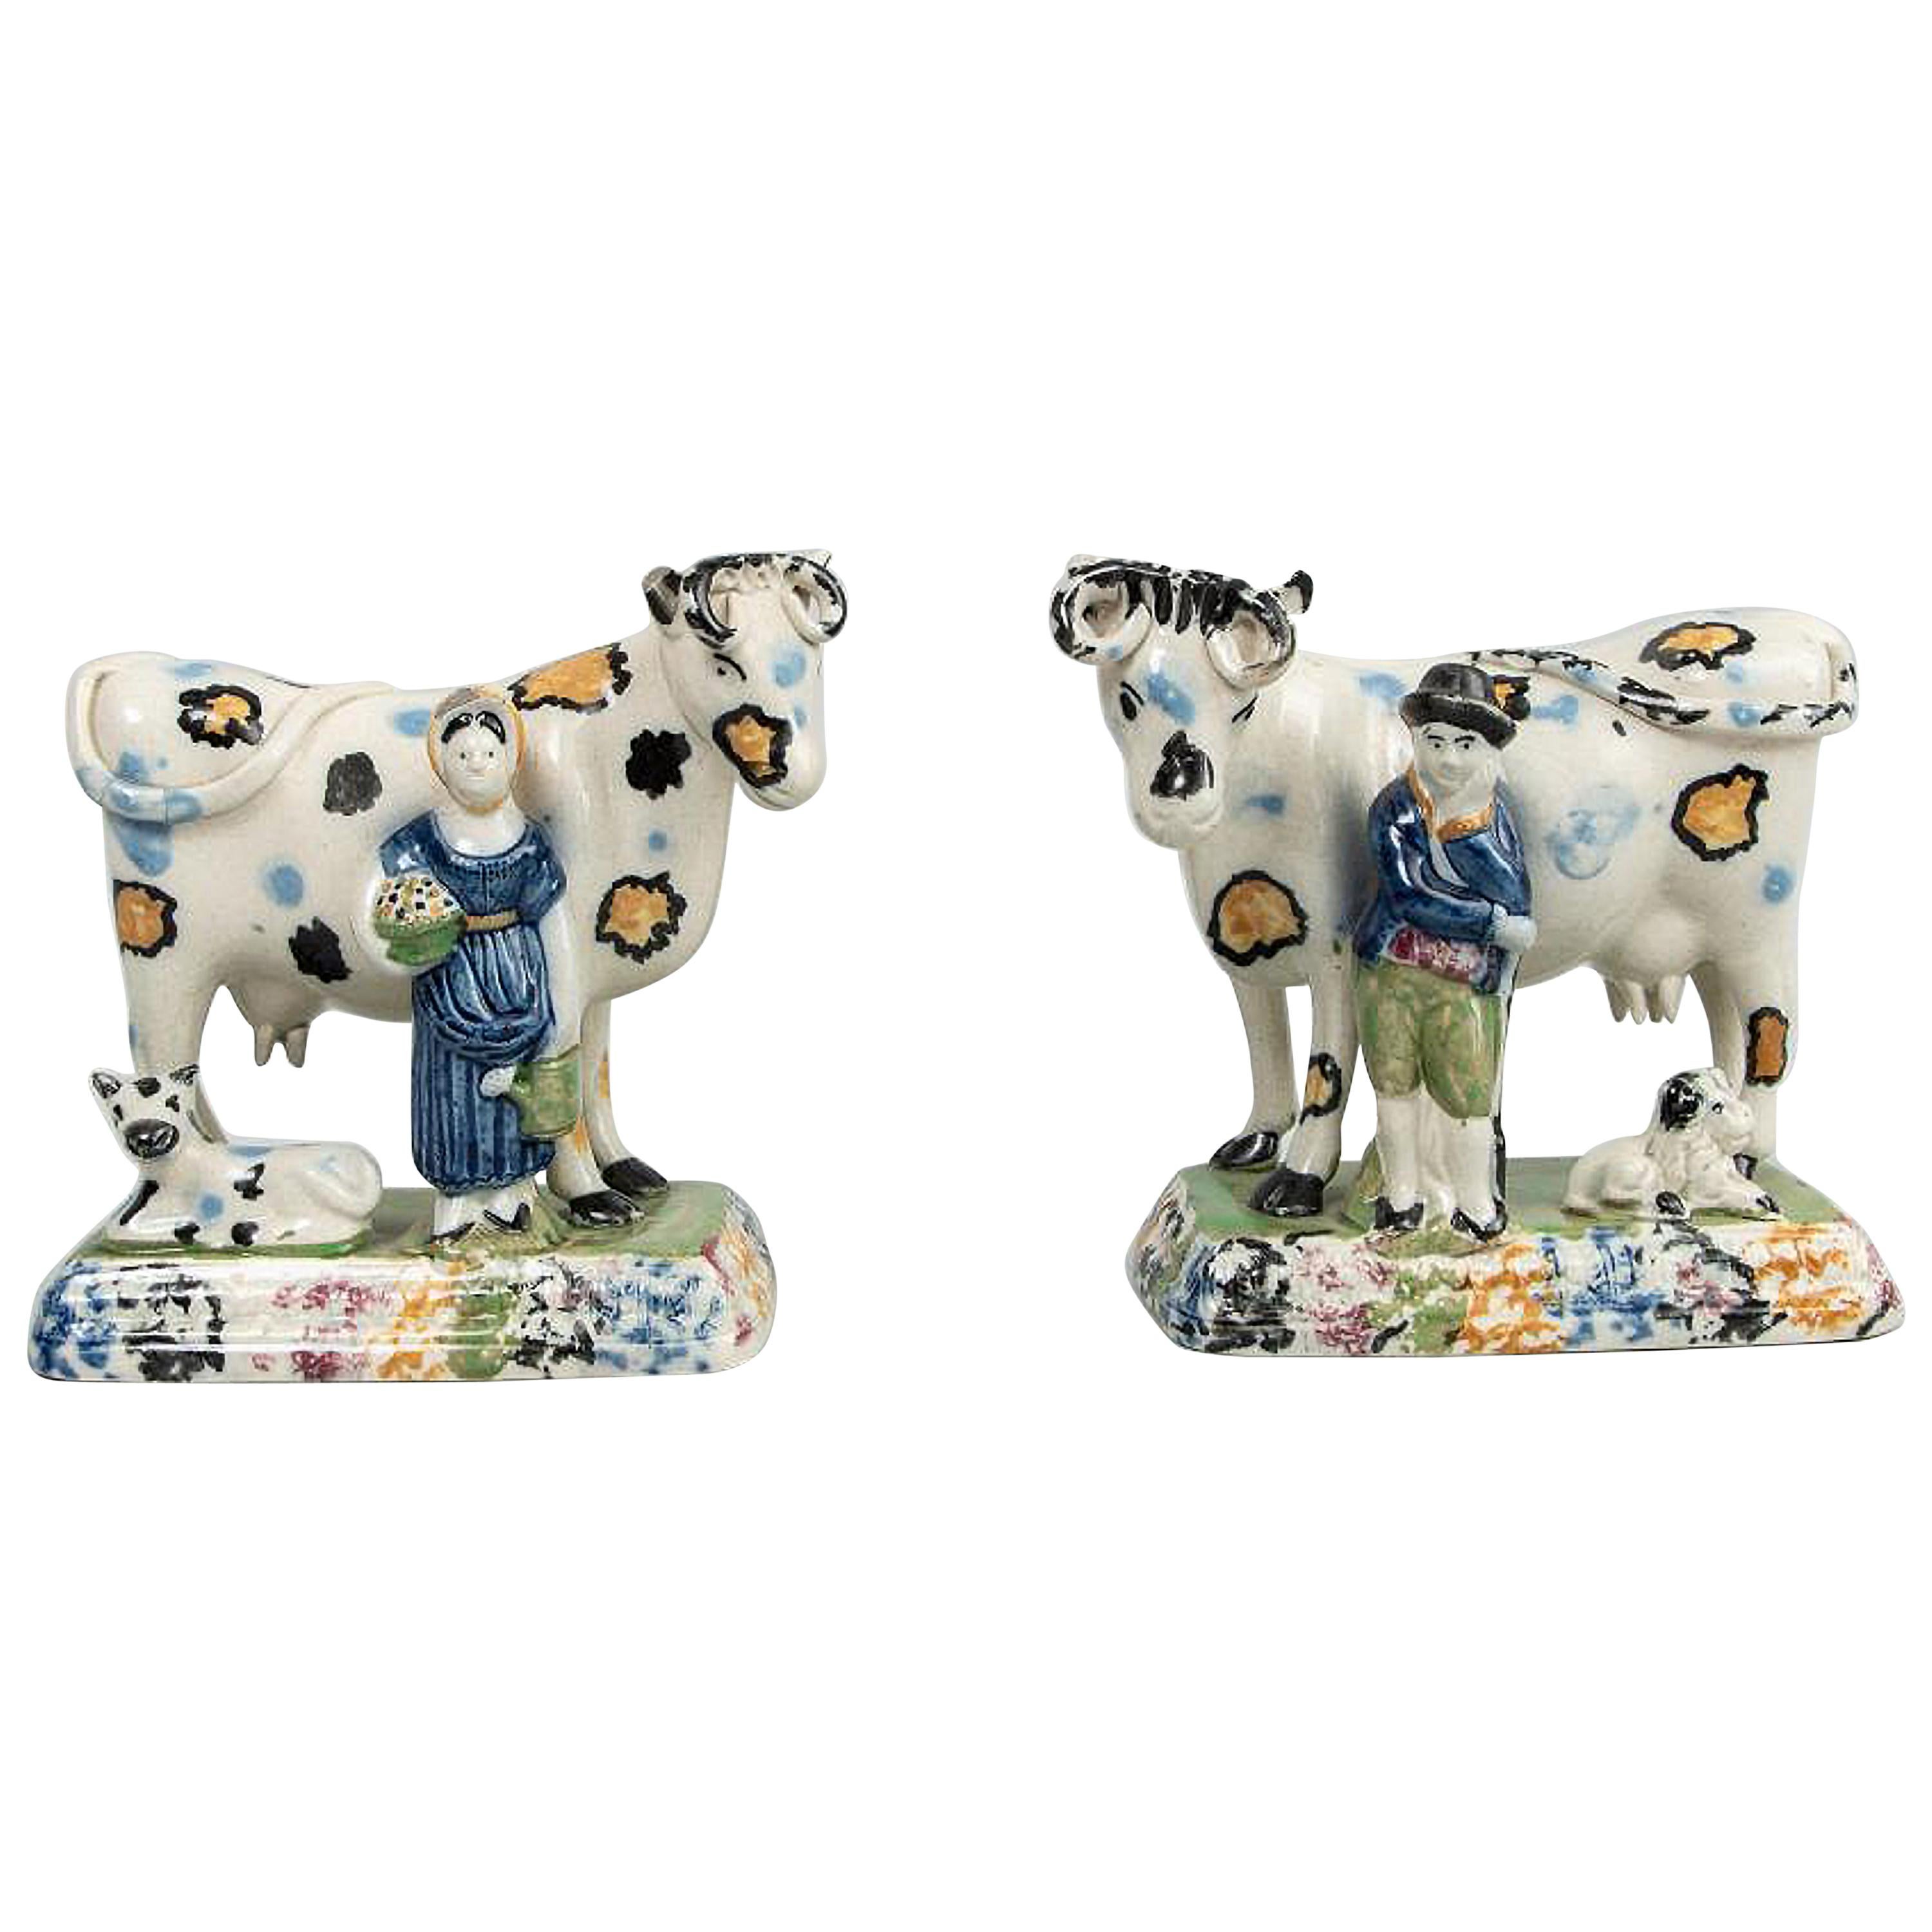 Prattware Pottery Models of Cows with Figures, Yorkshire, 1810-1820